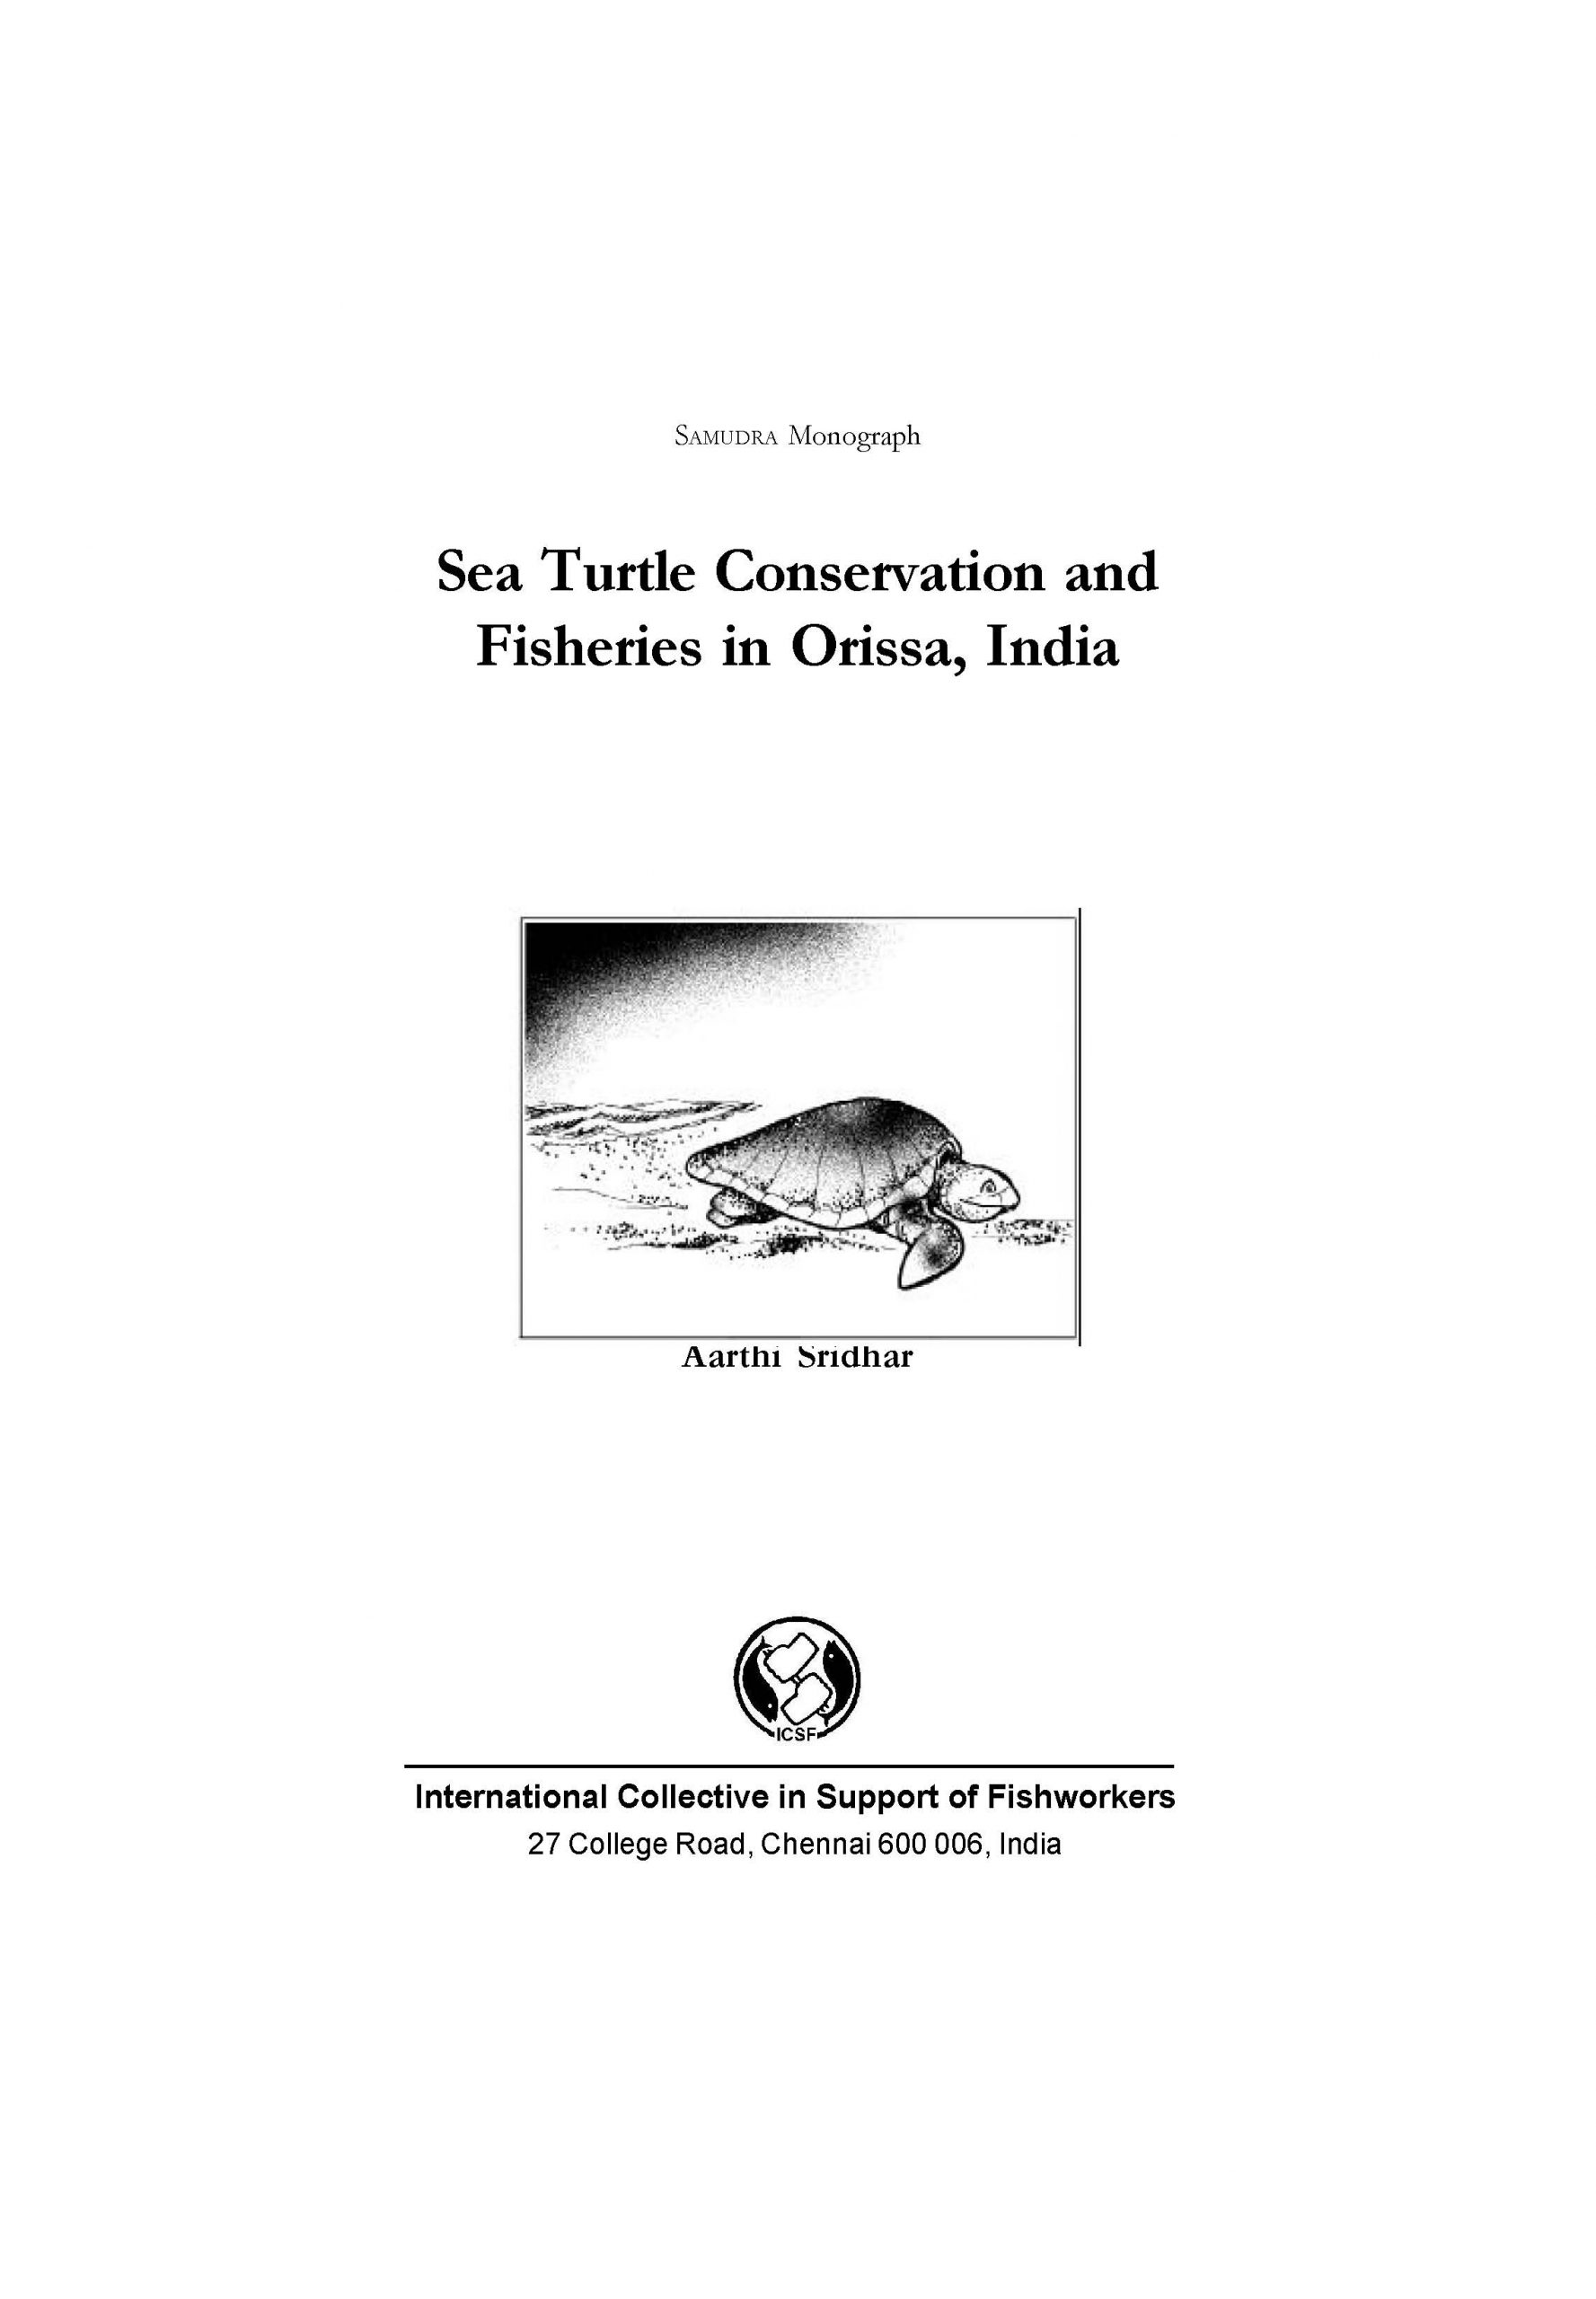 Sea Turtle Conservation and Fisheries in Orissa, India